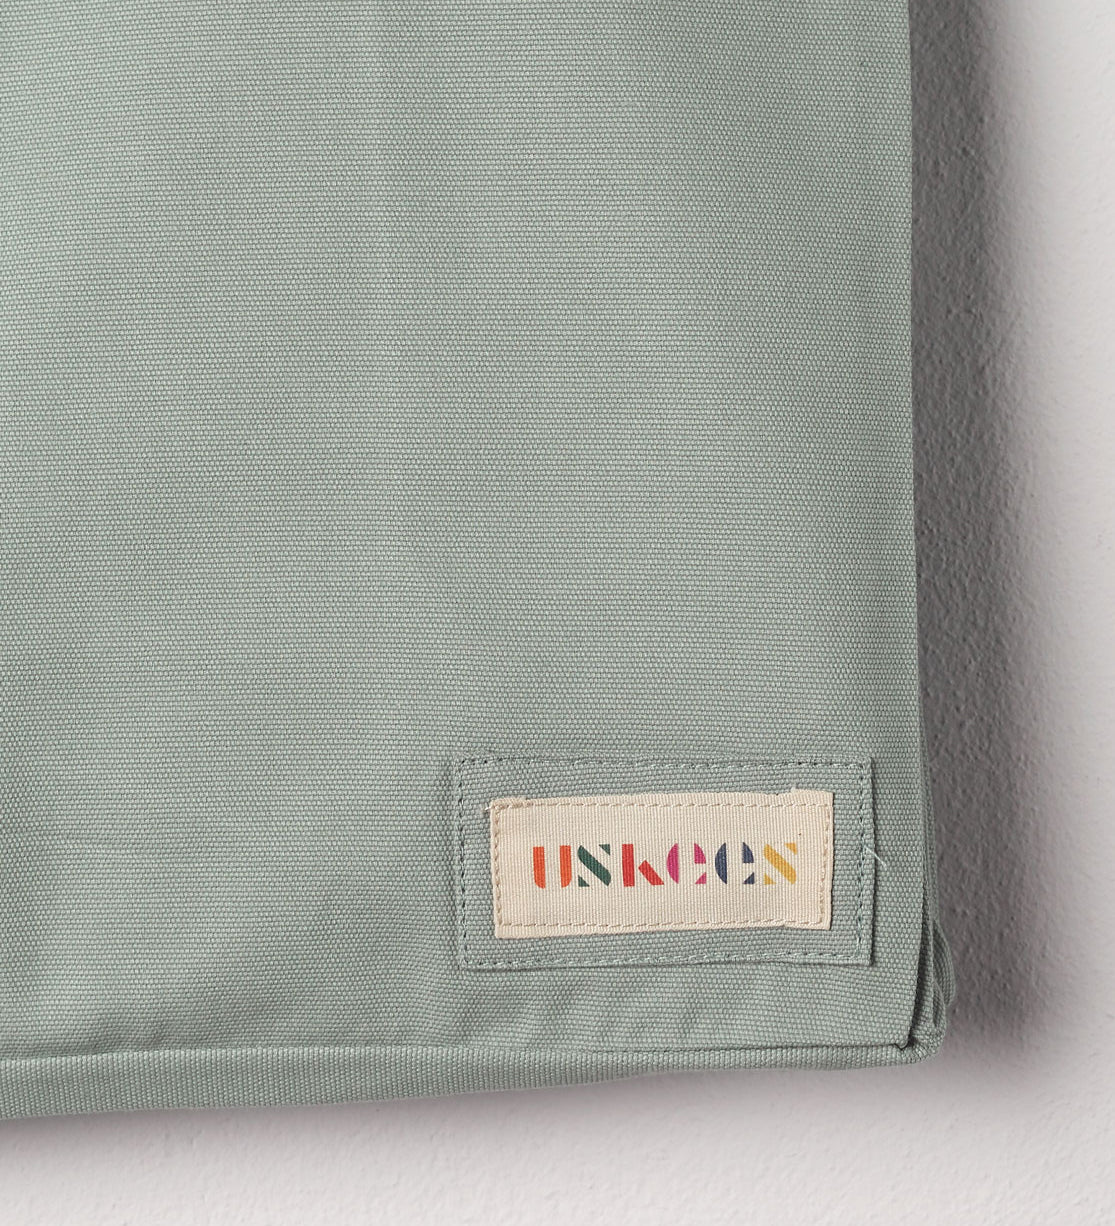 Close-up view of Uskees #4001 large tote bag in jade green showing the Uskees woven label.